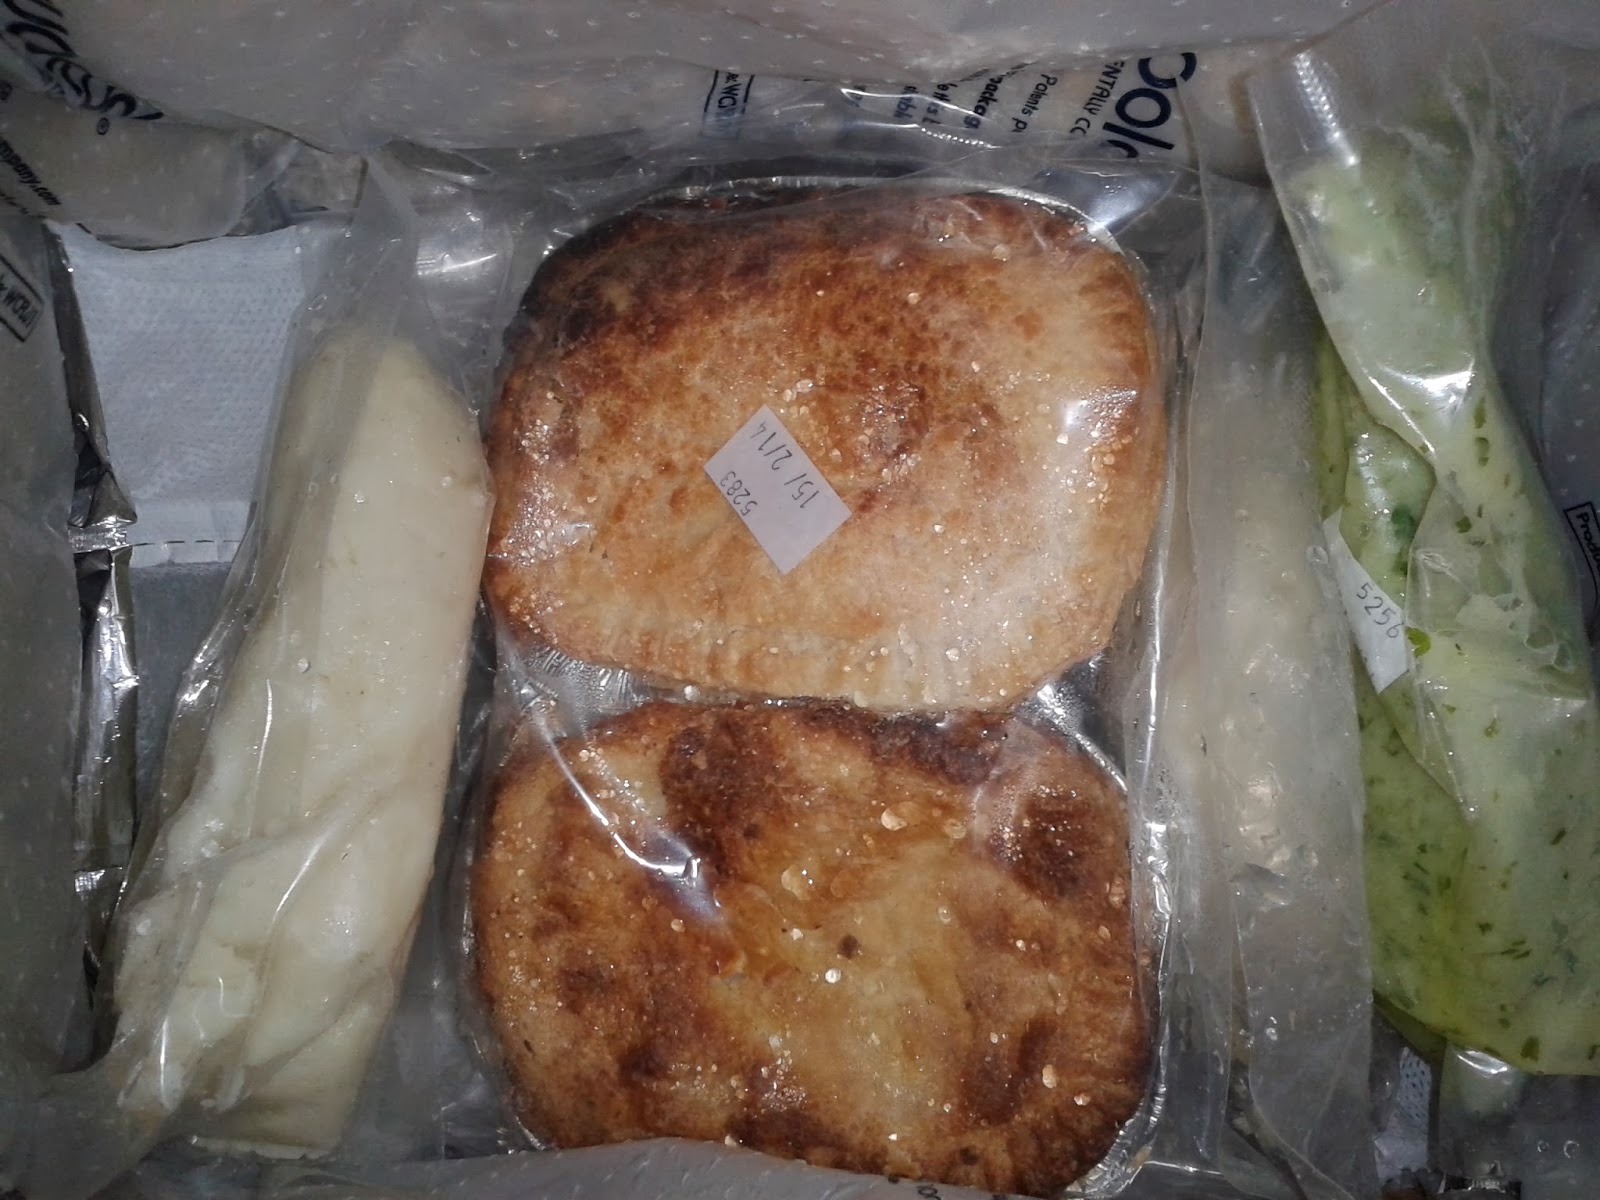 Pie and mash in a box